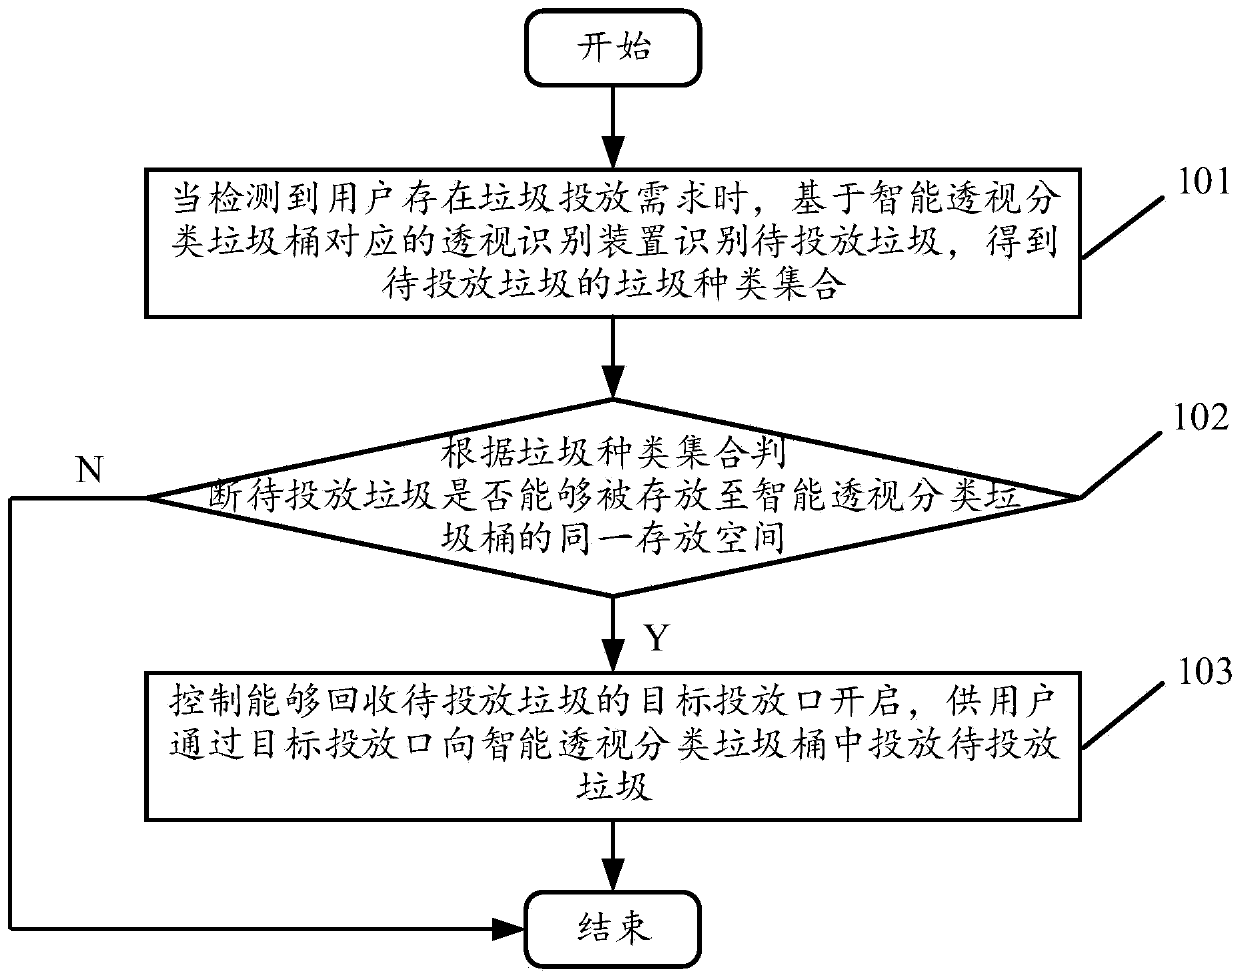 Garbage recycling implementation method and device based on intelligent perspective classification garbage can